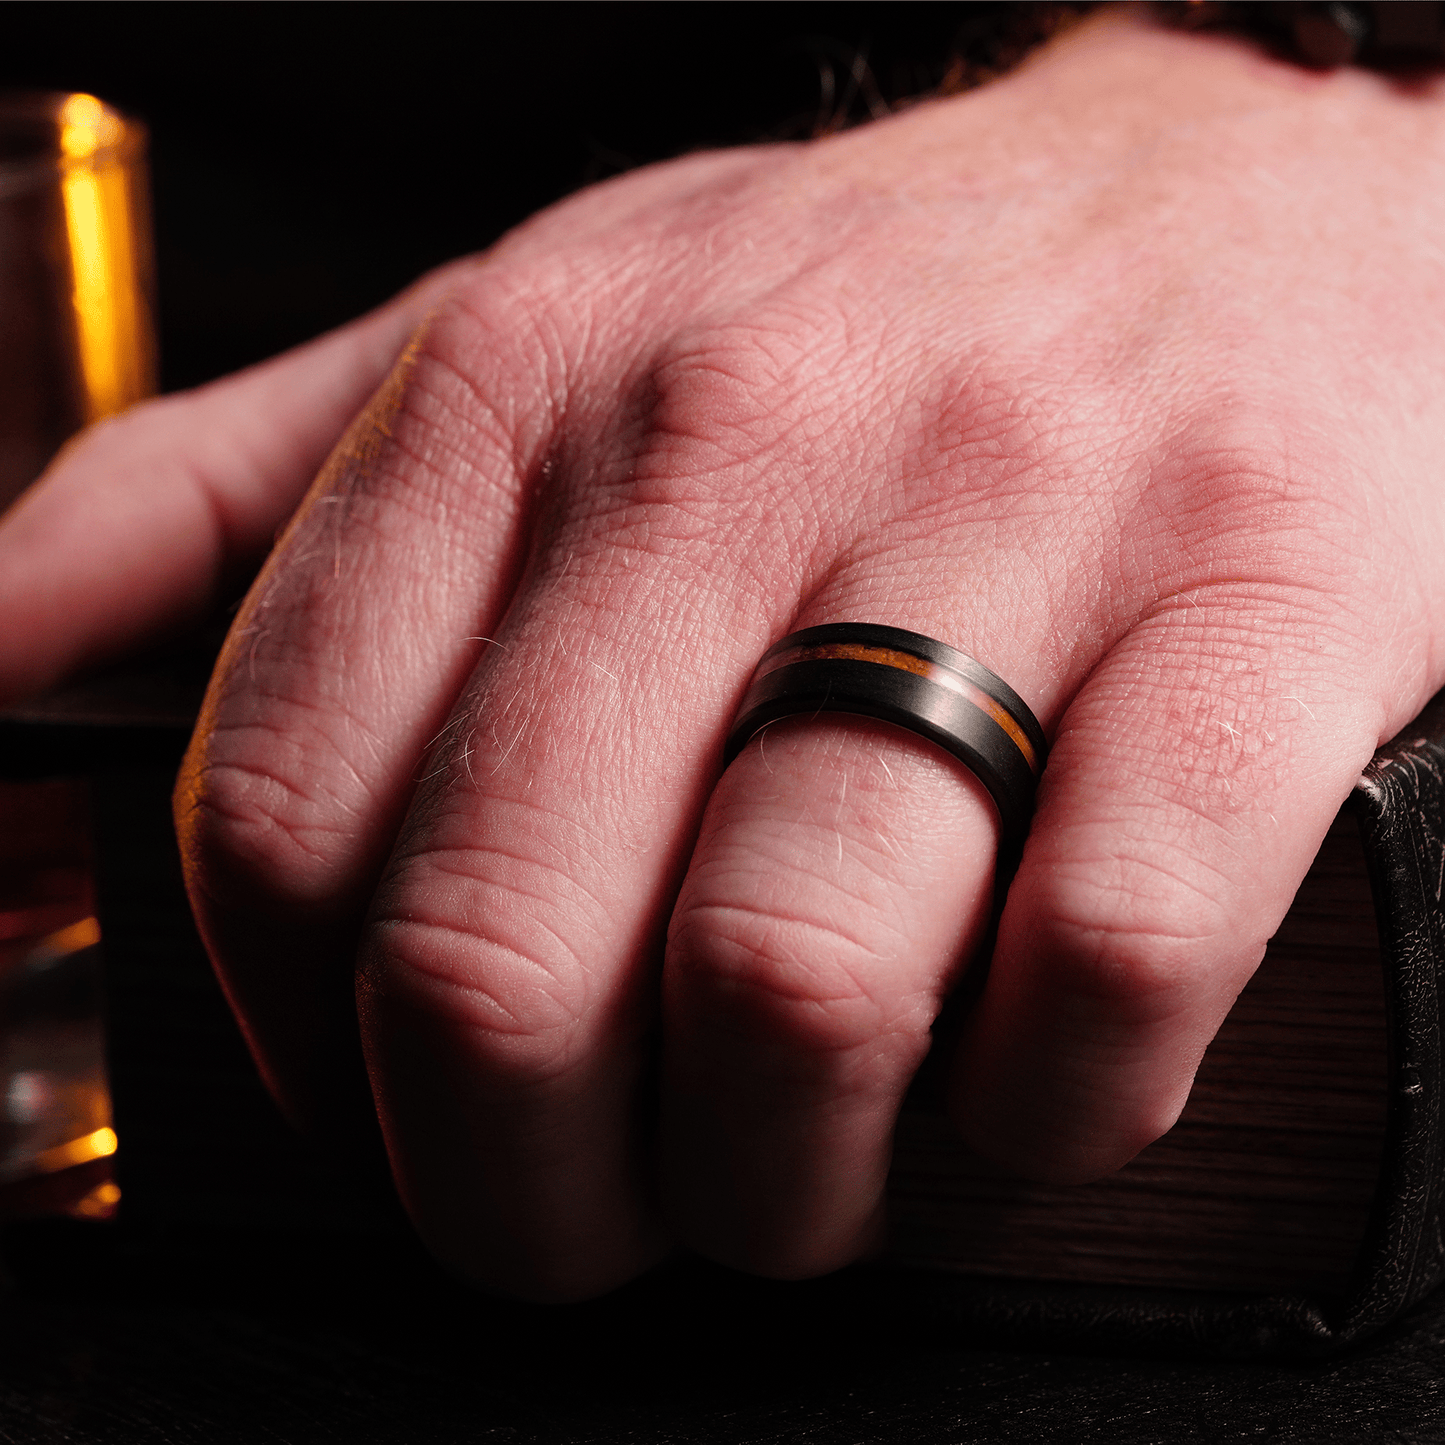 The Neat - Men's Wedding Rings - Manly Bands